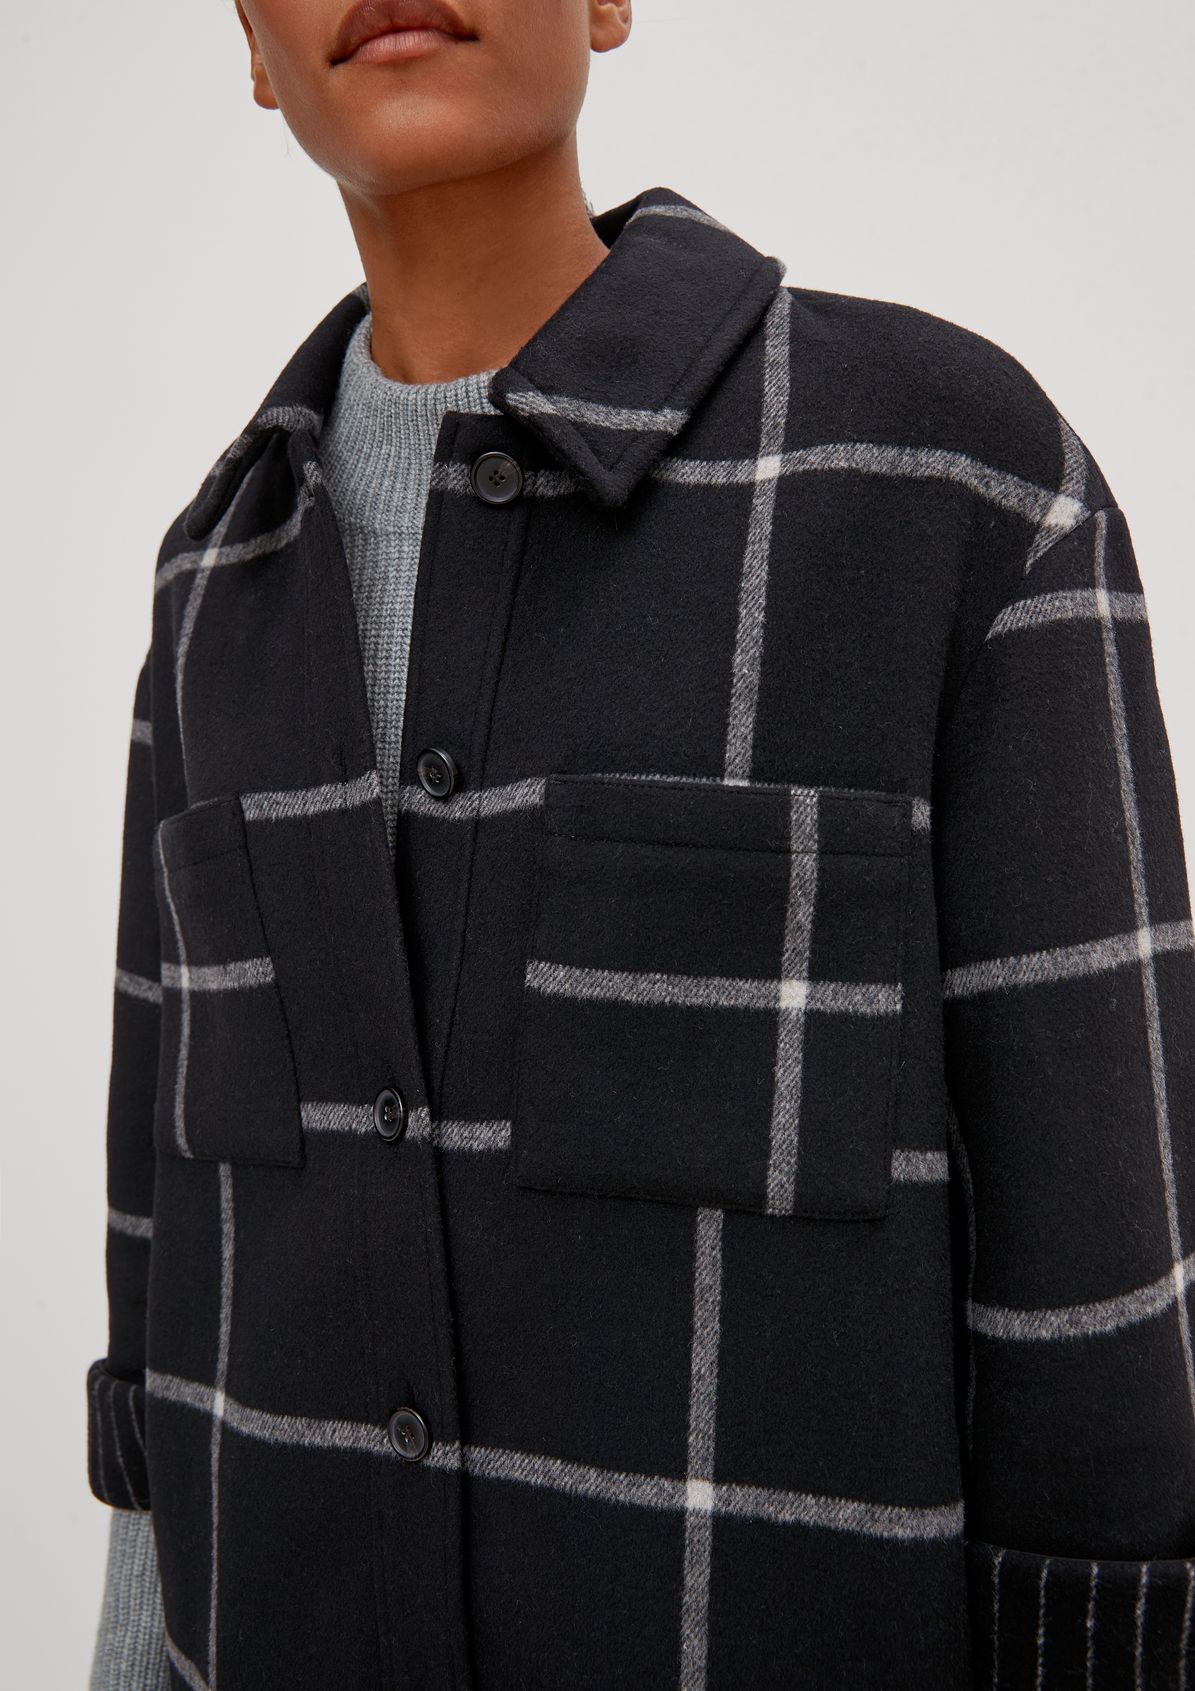 Wool blend jacket from comma